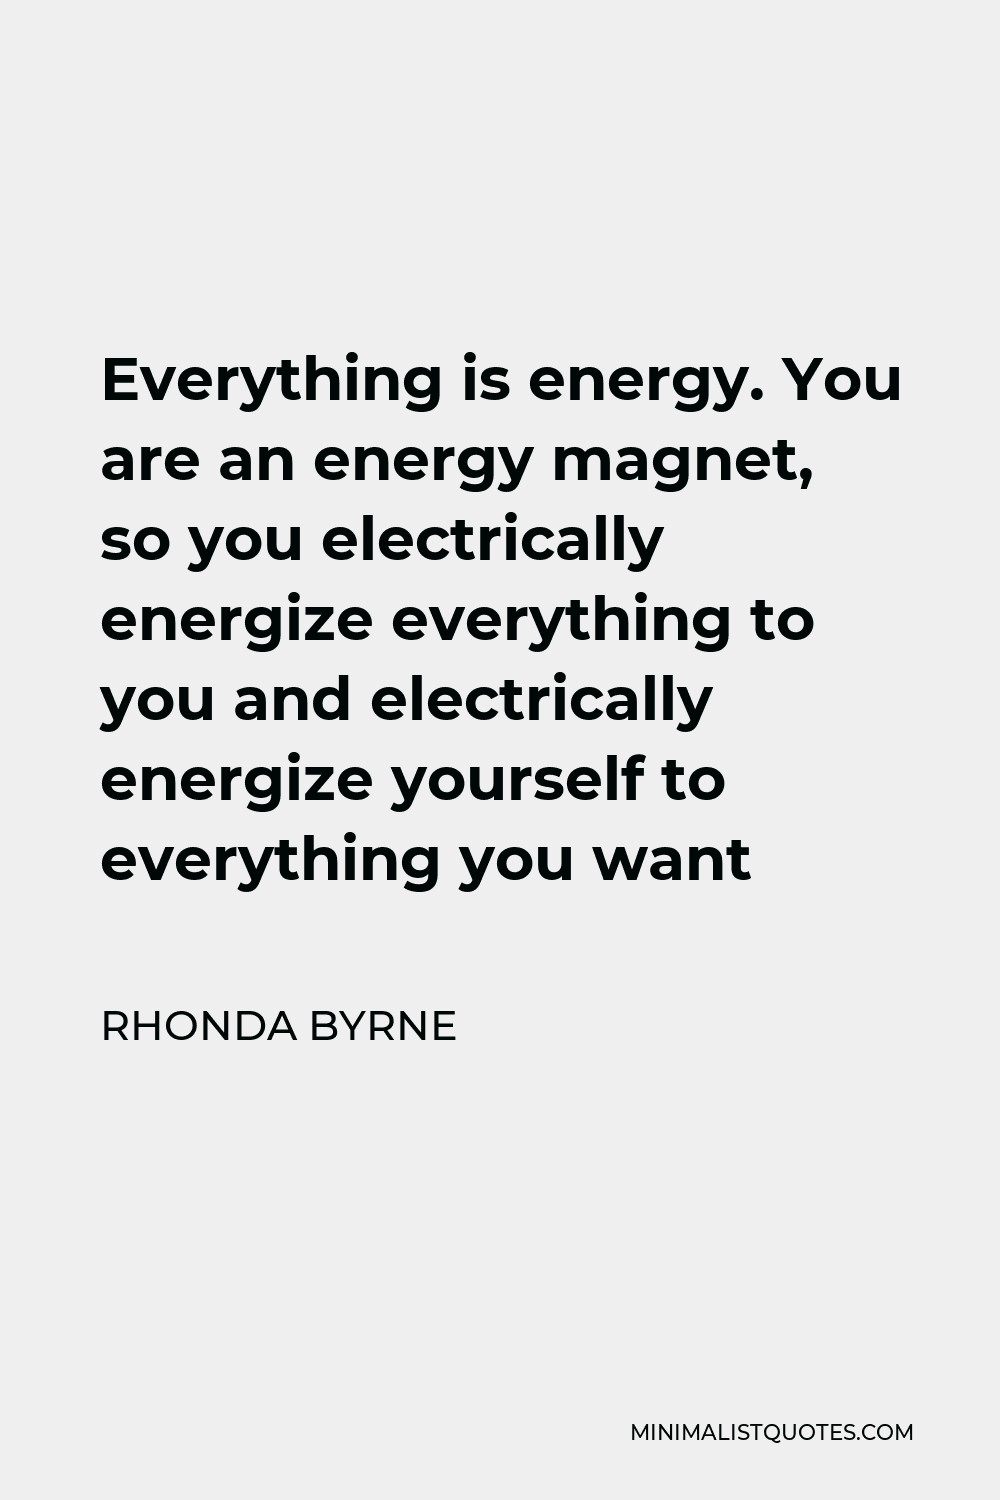 Rhonda Byrne Quote - Everything is energy. You are an energy magnet, so you electrically energize everything to you and electrically energize yourself to everything you want